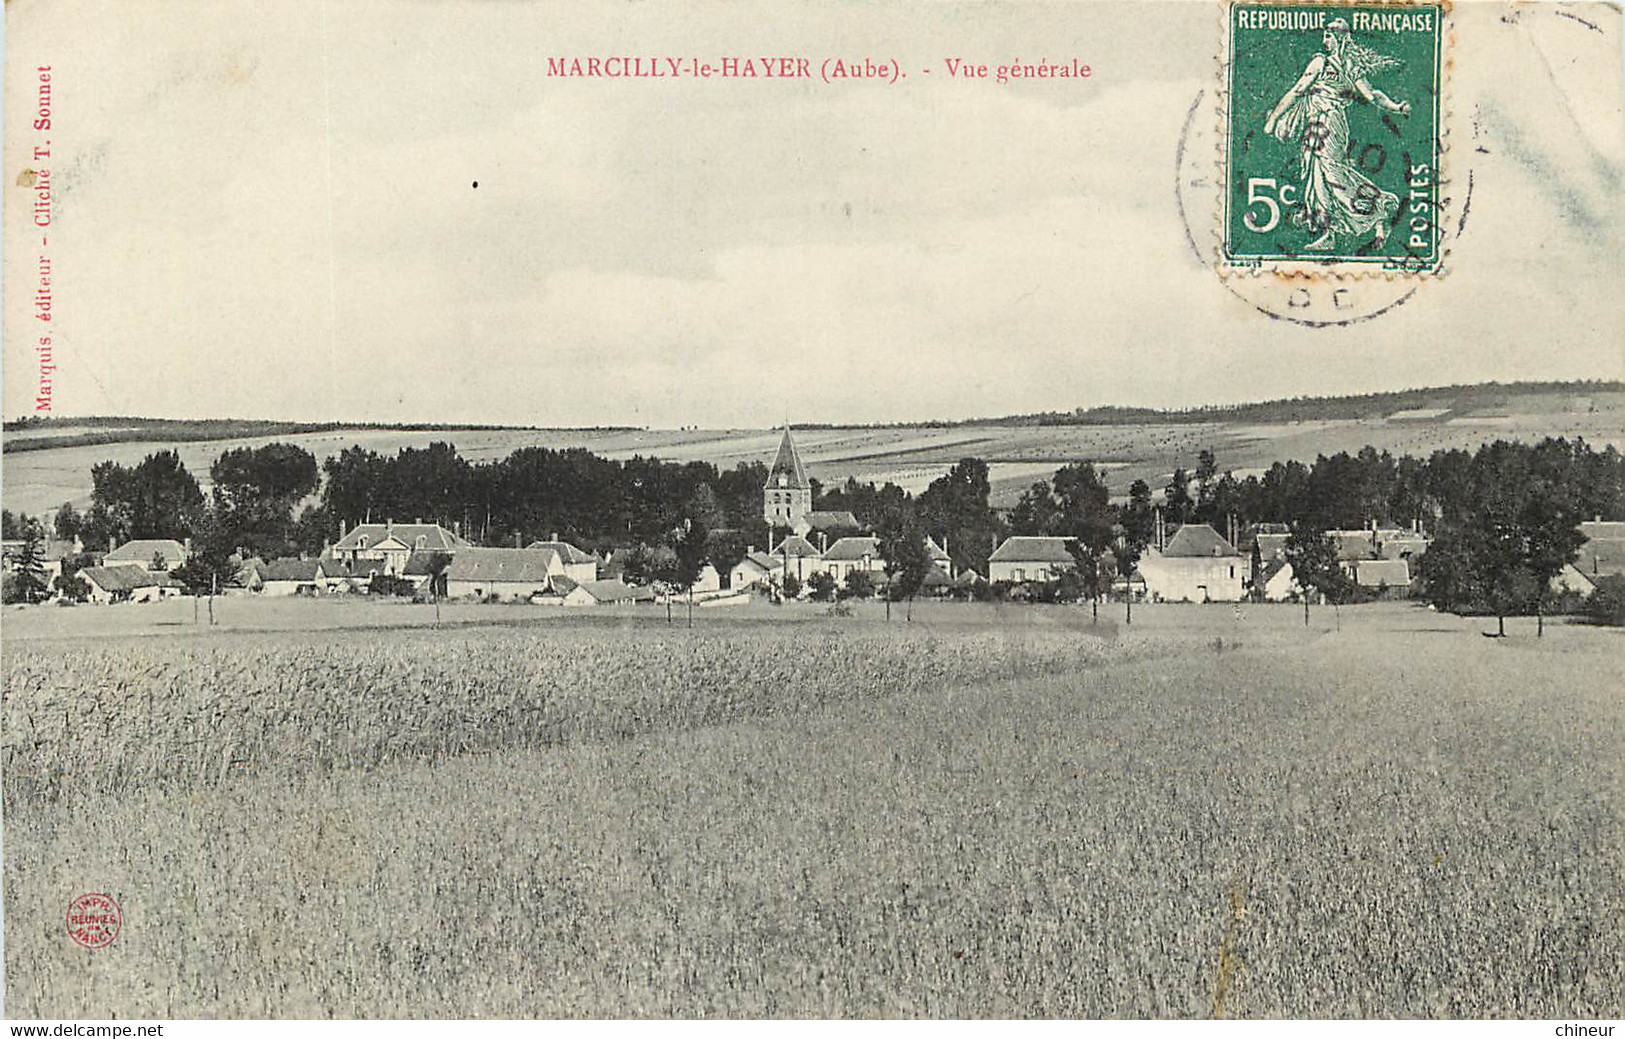 MARCILLY LE HAYER VUE GENERALE - Marcilly